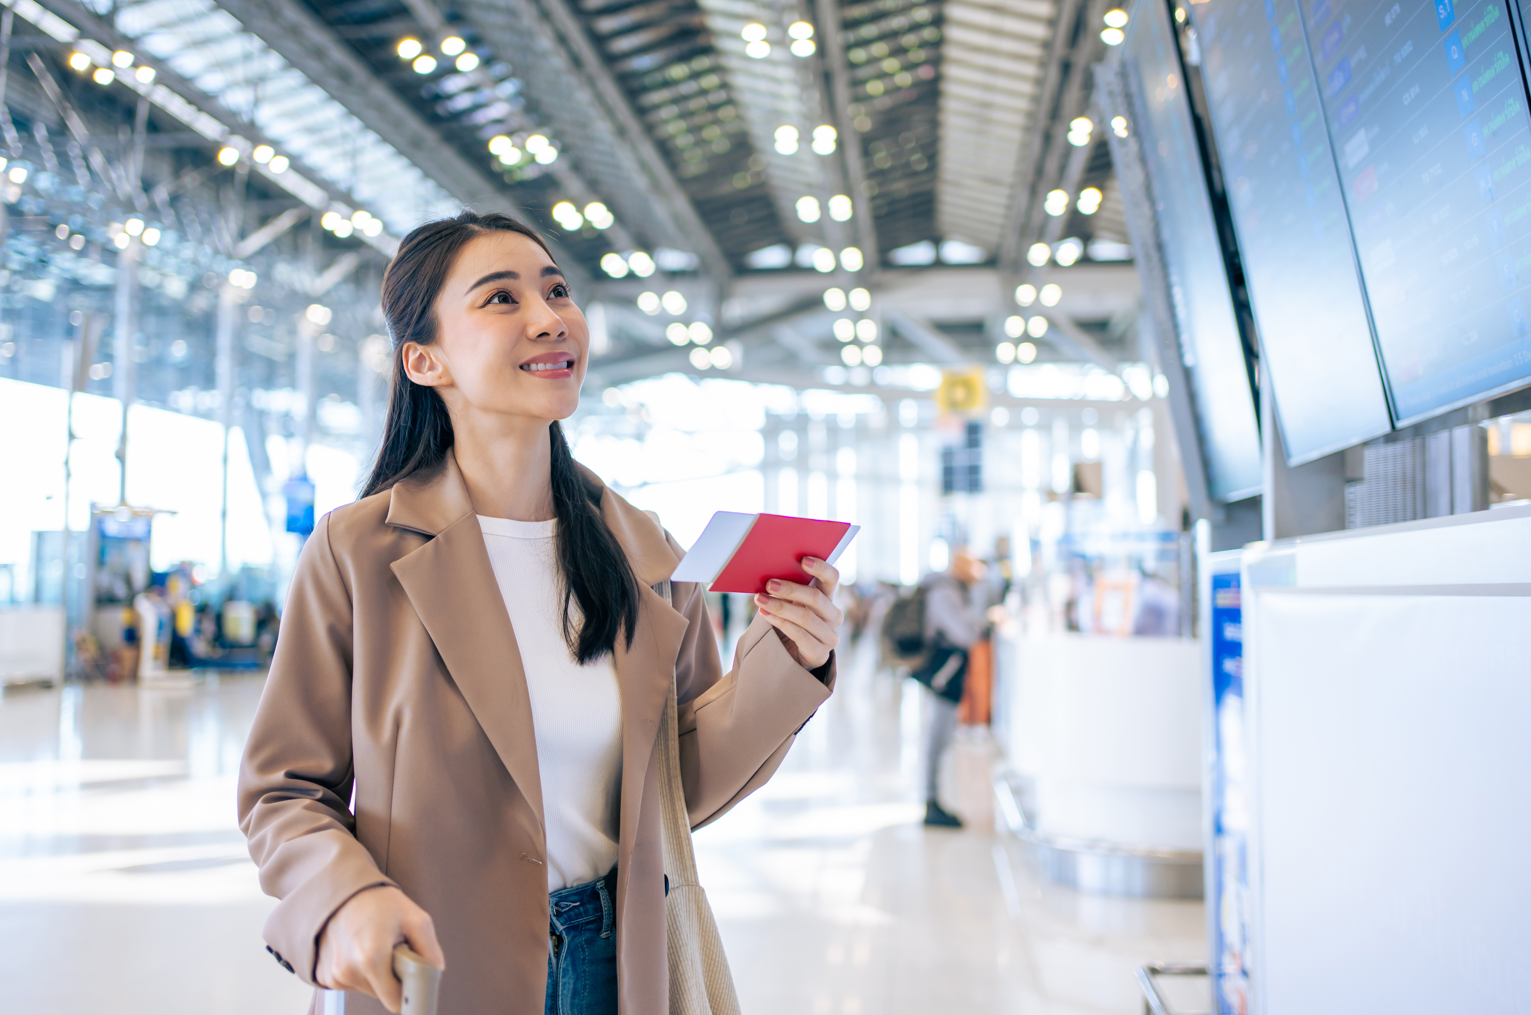 Asian young woman passenger after discovering are airline credit cards worth it checking departure boarding pass in airport.